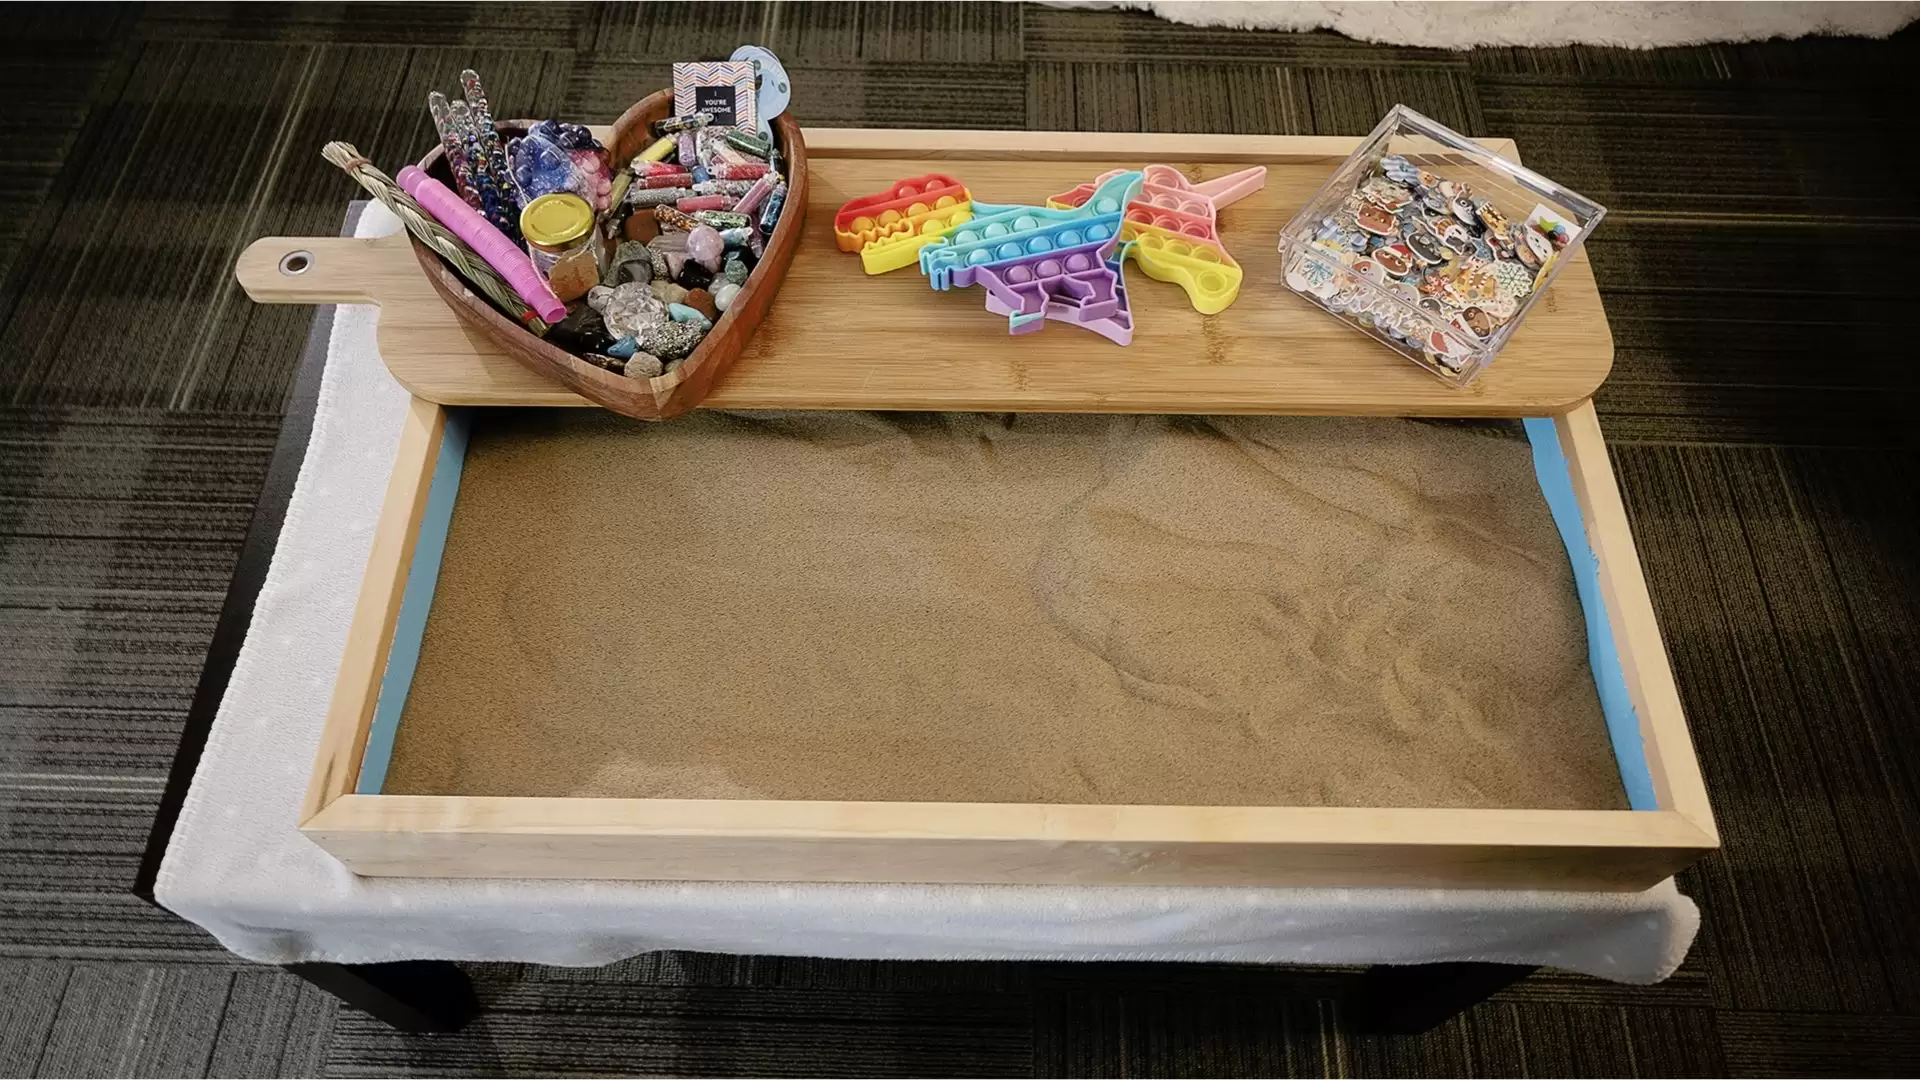 Sandbox tray filled with sand. A narrow wood cutting board is placed across the top with a heart shaped wooden box filled with stones, rocks and decorative objects, rainbow coloured dinosaur and unicorn push pop bubble fidget sensory toys, and a plastic tray of animal shaped objects.